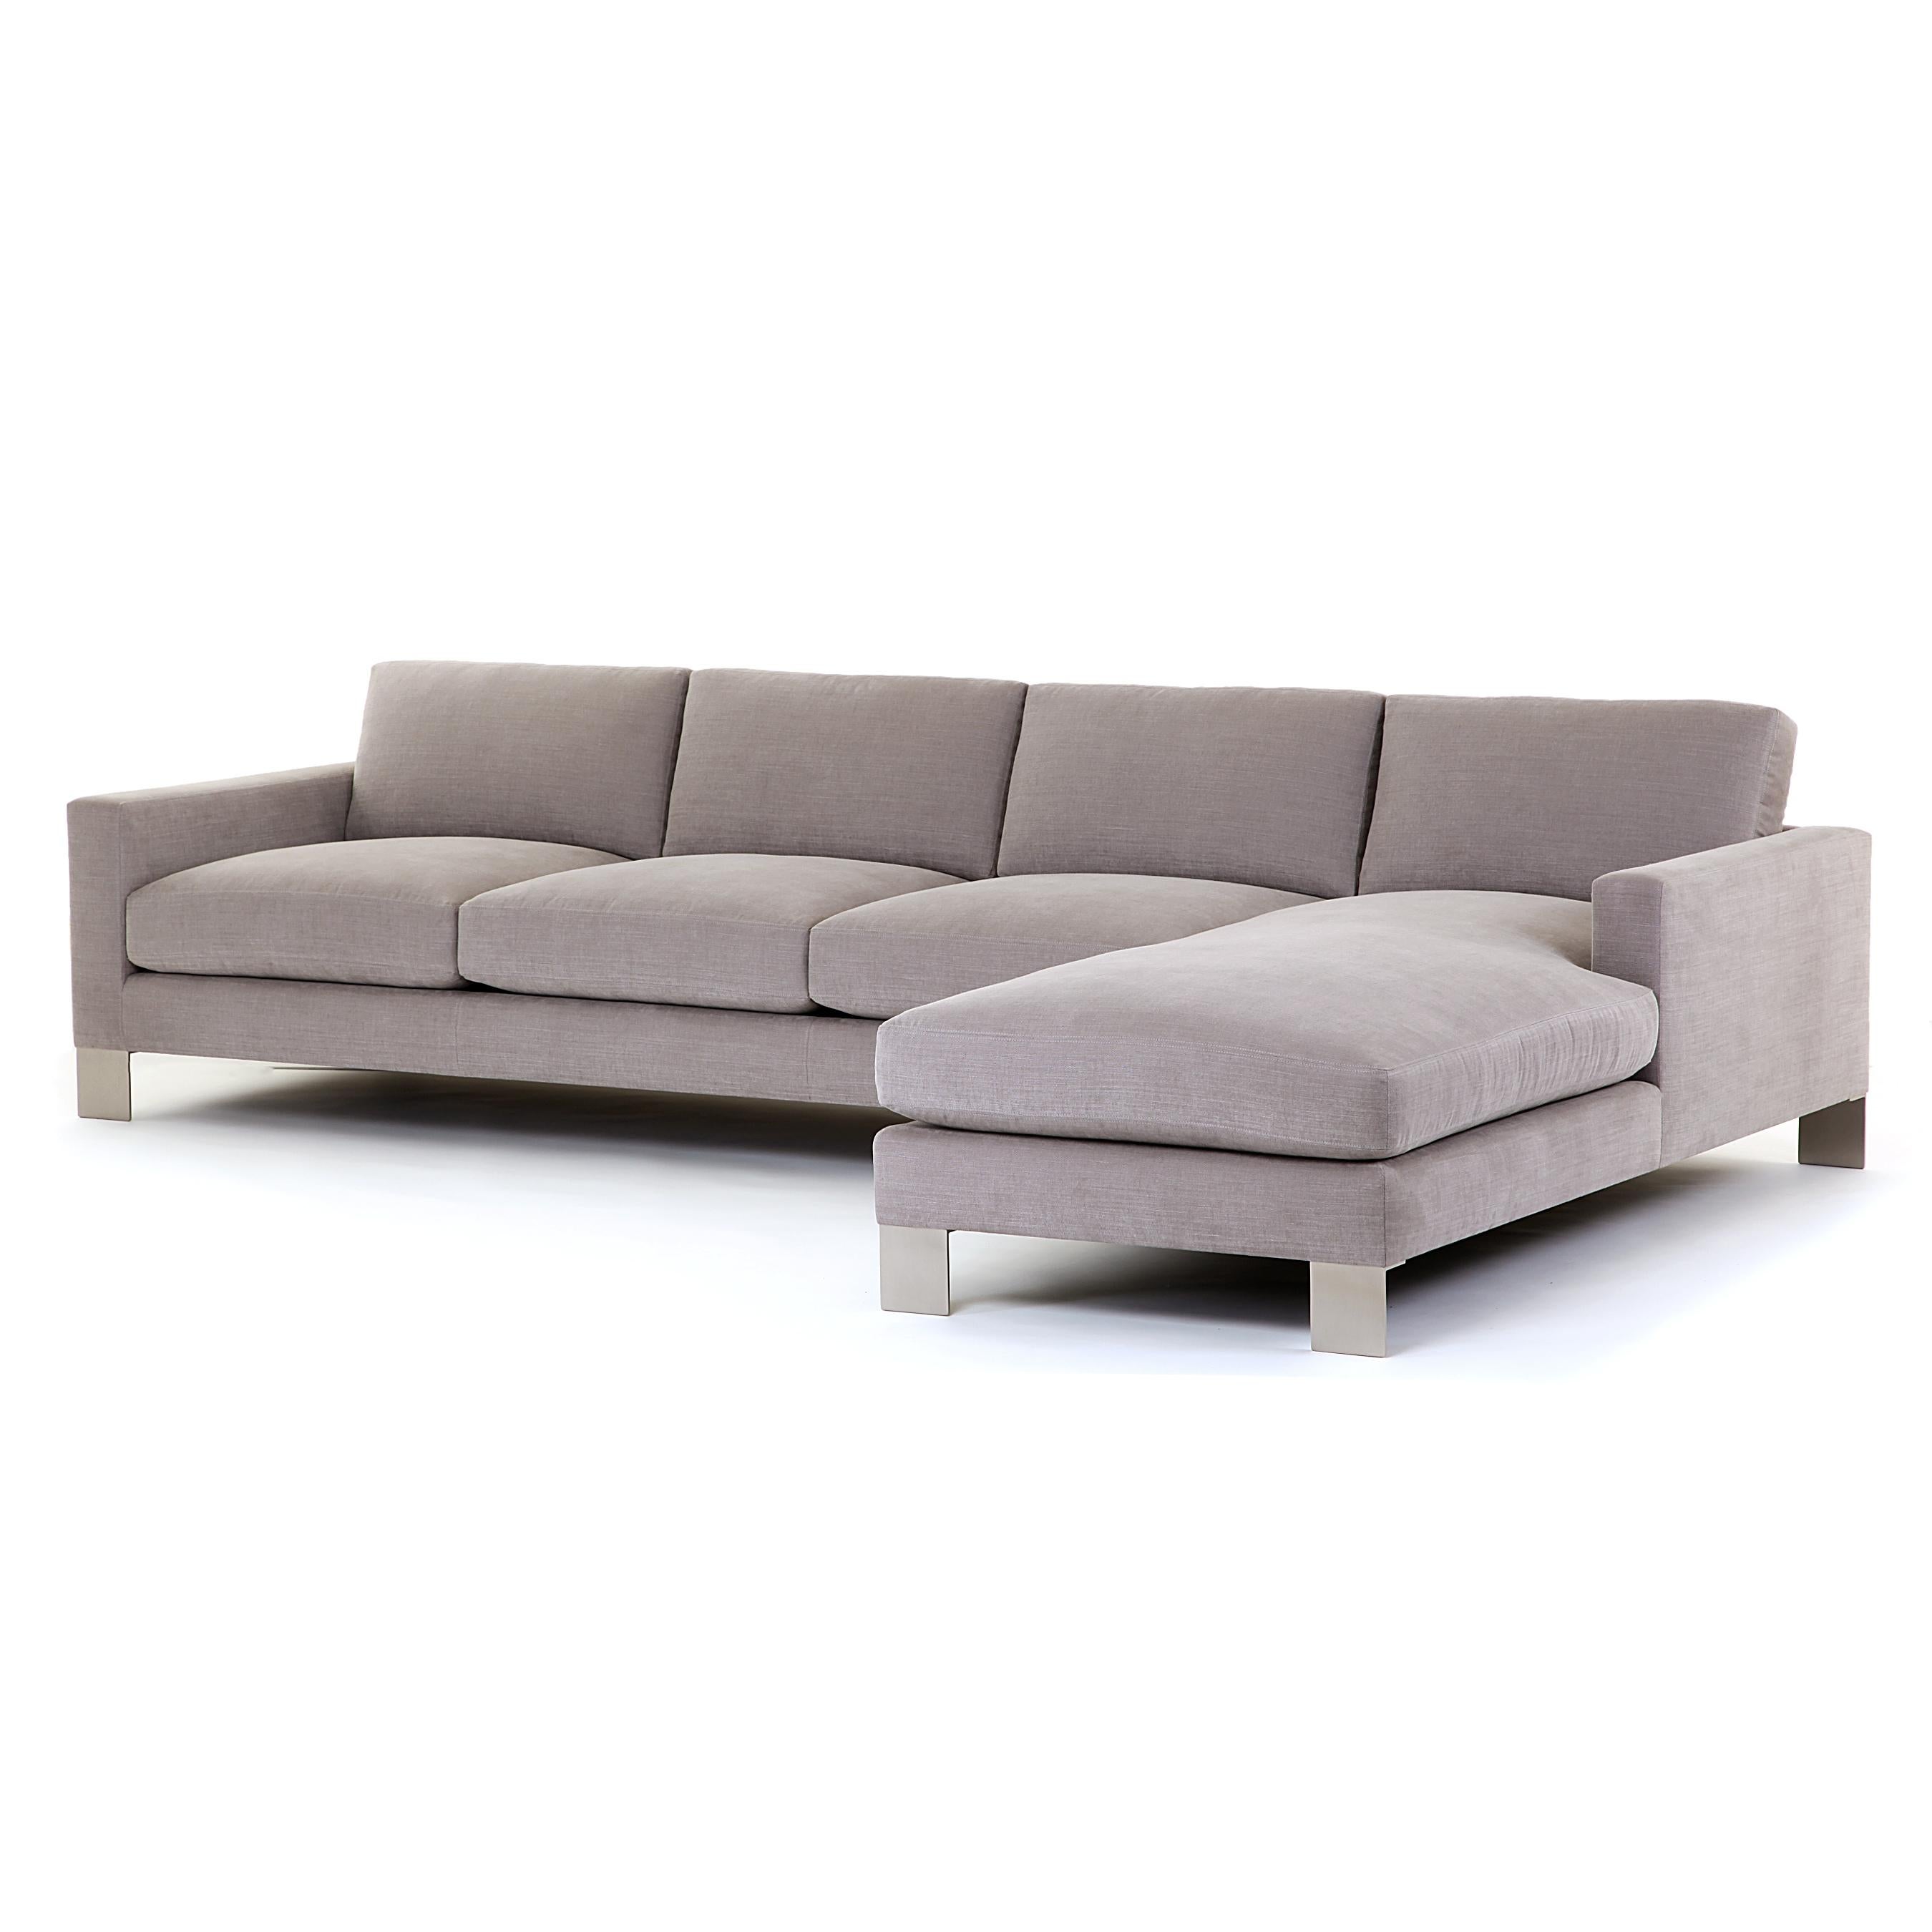 Grand and sophisticated, this plush sectional has just enough seat and back to be proportionally perfect within the framework of the rest of its body. With sleek, modern, metal legs and a crowning chaise, this piece is a perfect balance of comfort